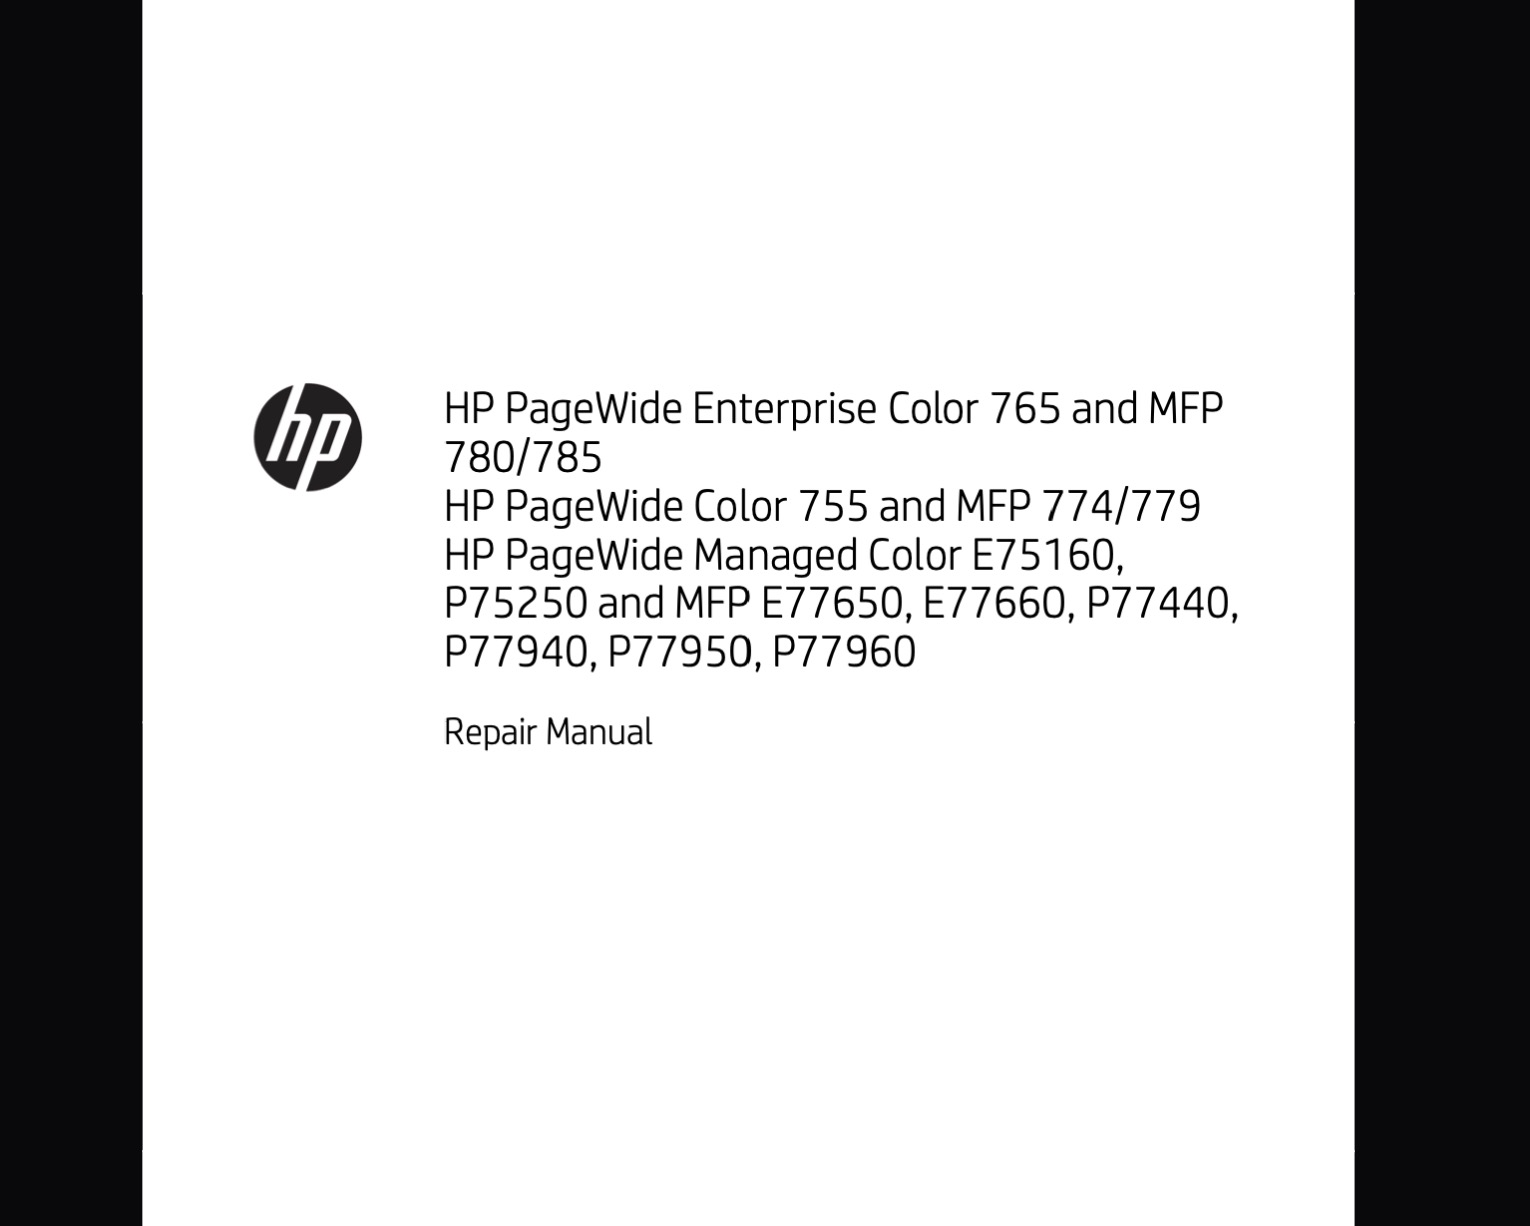 HP PageWide Enterprise Color 765, MFP 780, MFP 785, PageWide Color 755, MFP 774, MFP 779,  PageWide Managed Color E75160, P75250, MFP E77650, E77660, P77440, P77940, P77950, P77960 Service Repair Manual,  Parts List and Diagrams